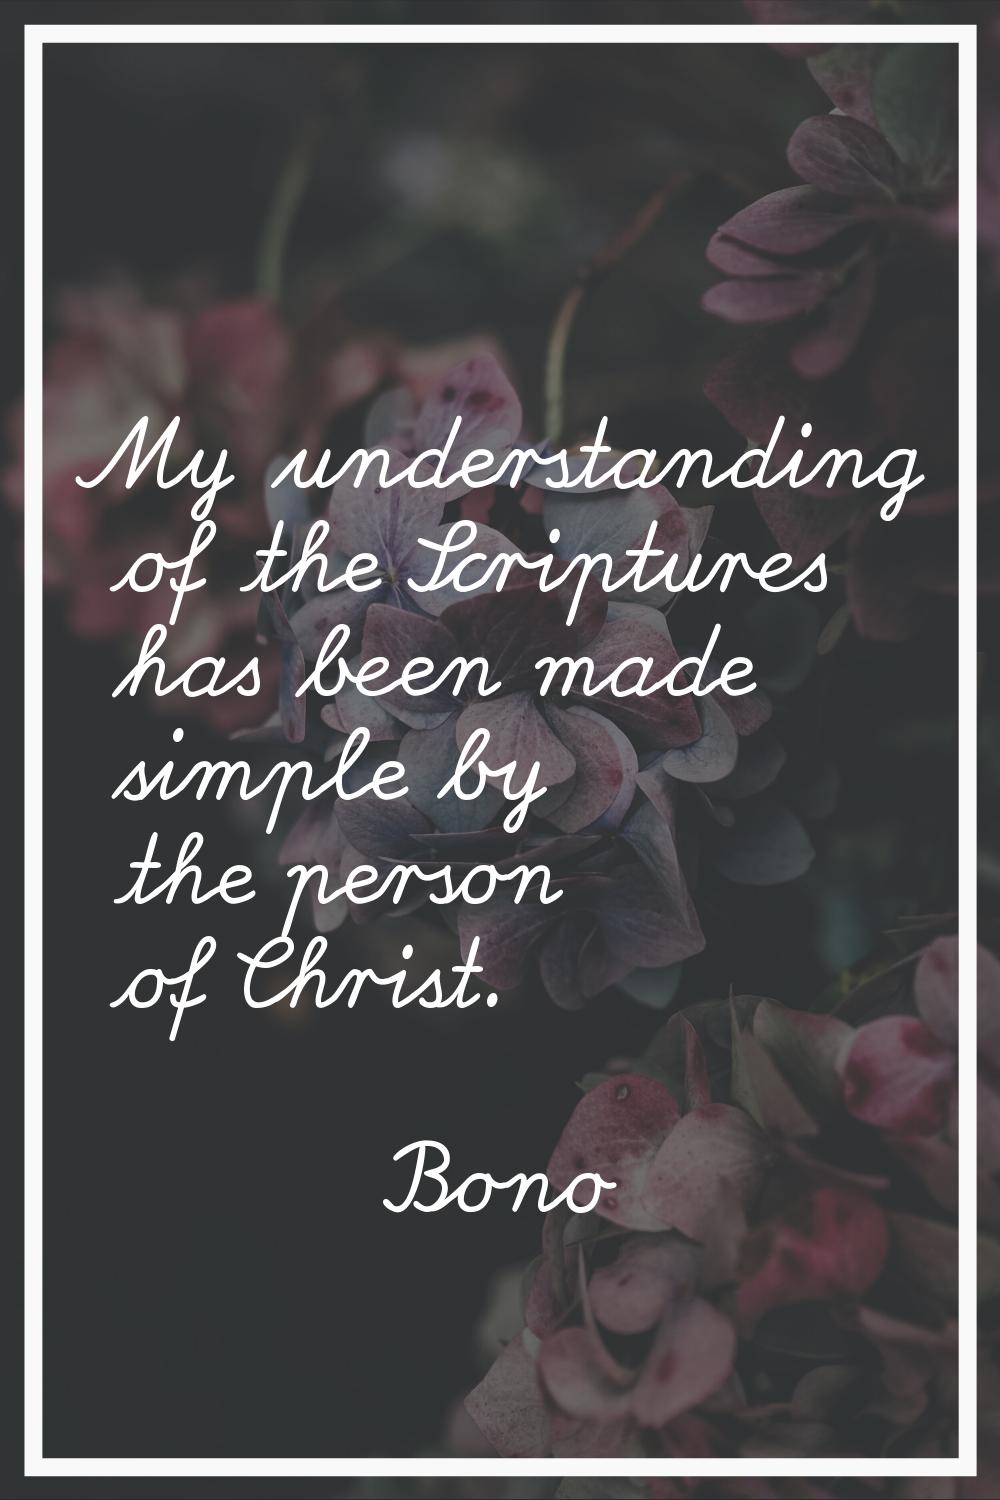 My understanding of the Scriptures has been made simple by the person of Christ.